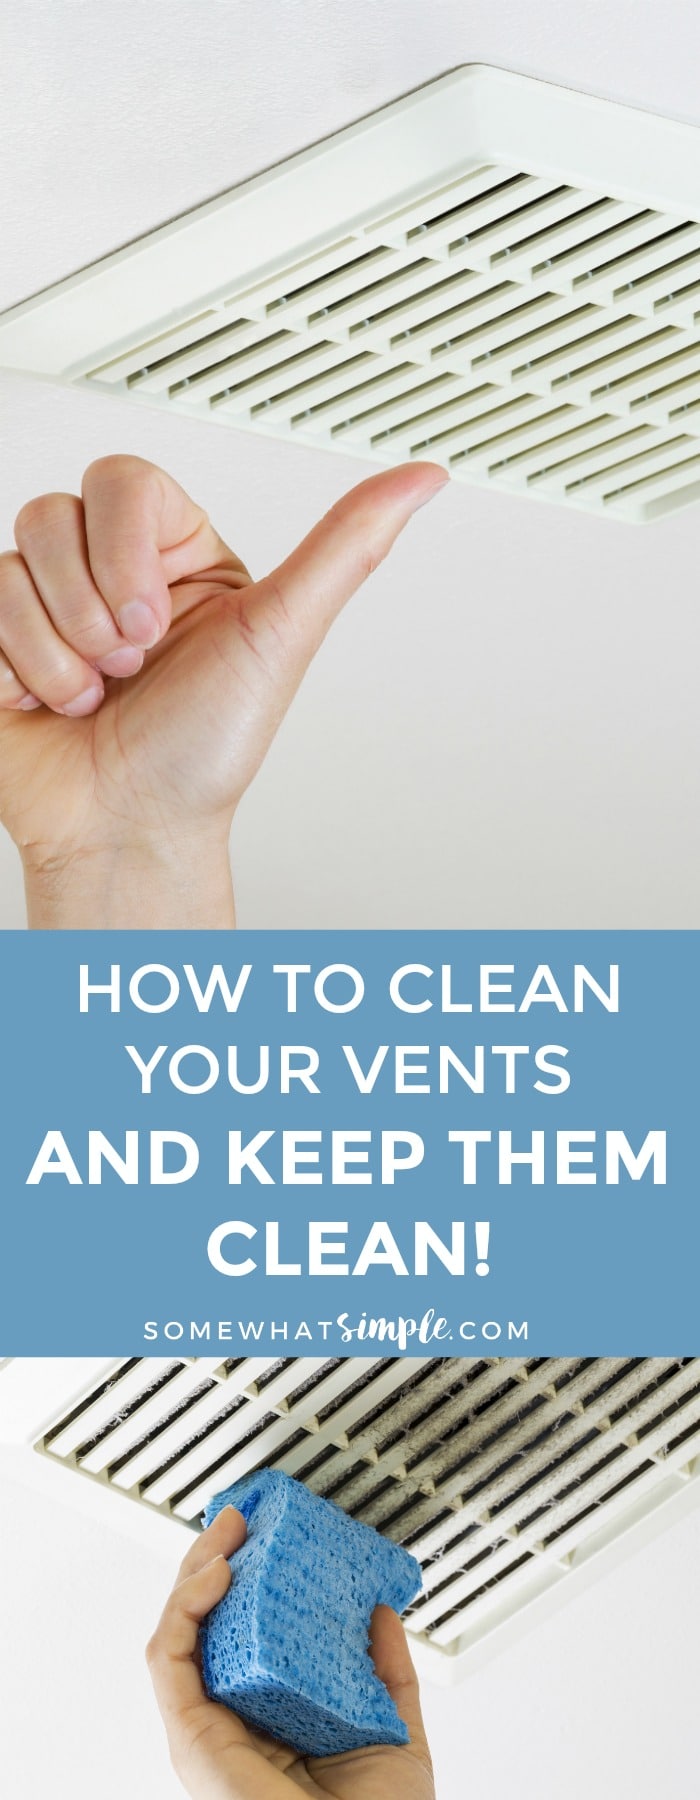 This ONE simple vent cleaning tip will keep your vents looking brand new with MINIMAL work! #cleaning #cleaningtips #cleaninghacks #cleaningtricks #springcleaning  via @somewhatsimple